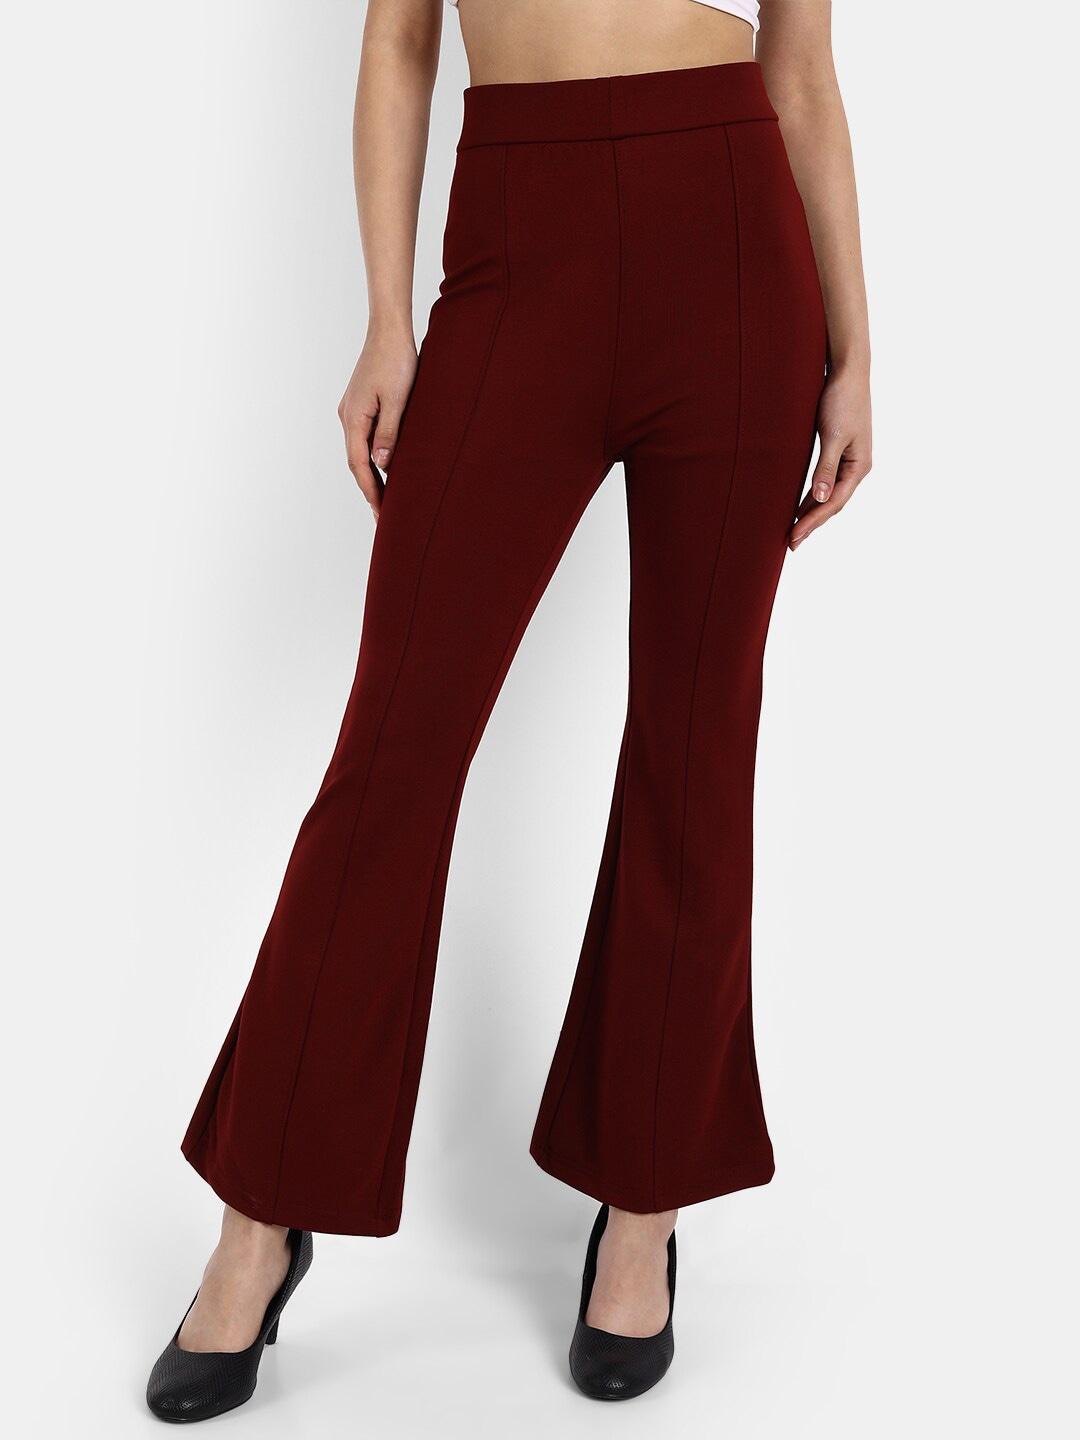 Next One Women Maroon Solid Skinny-Fit Jeggings